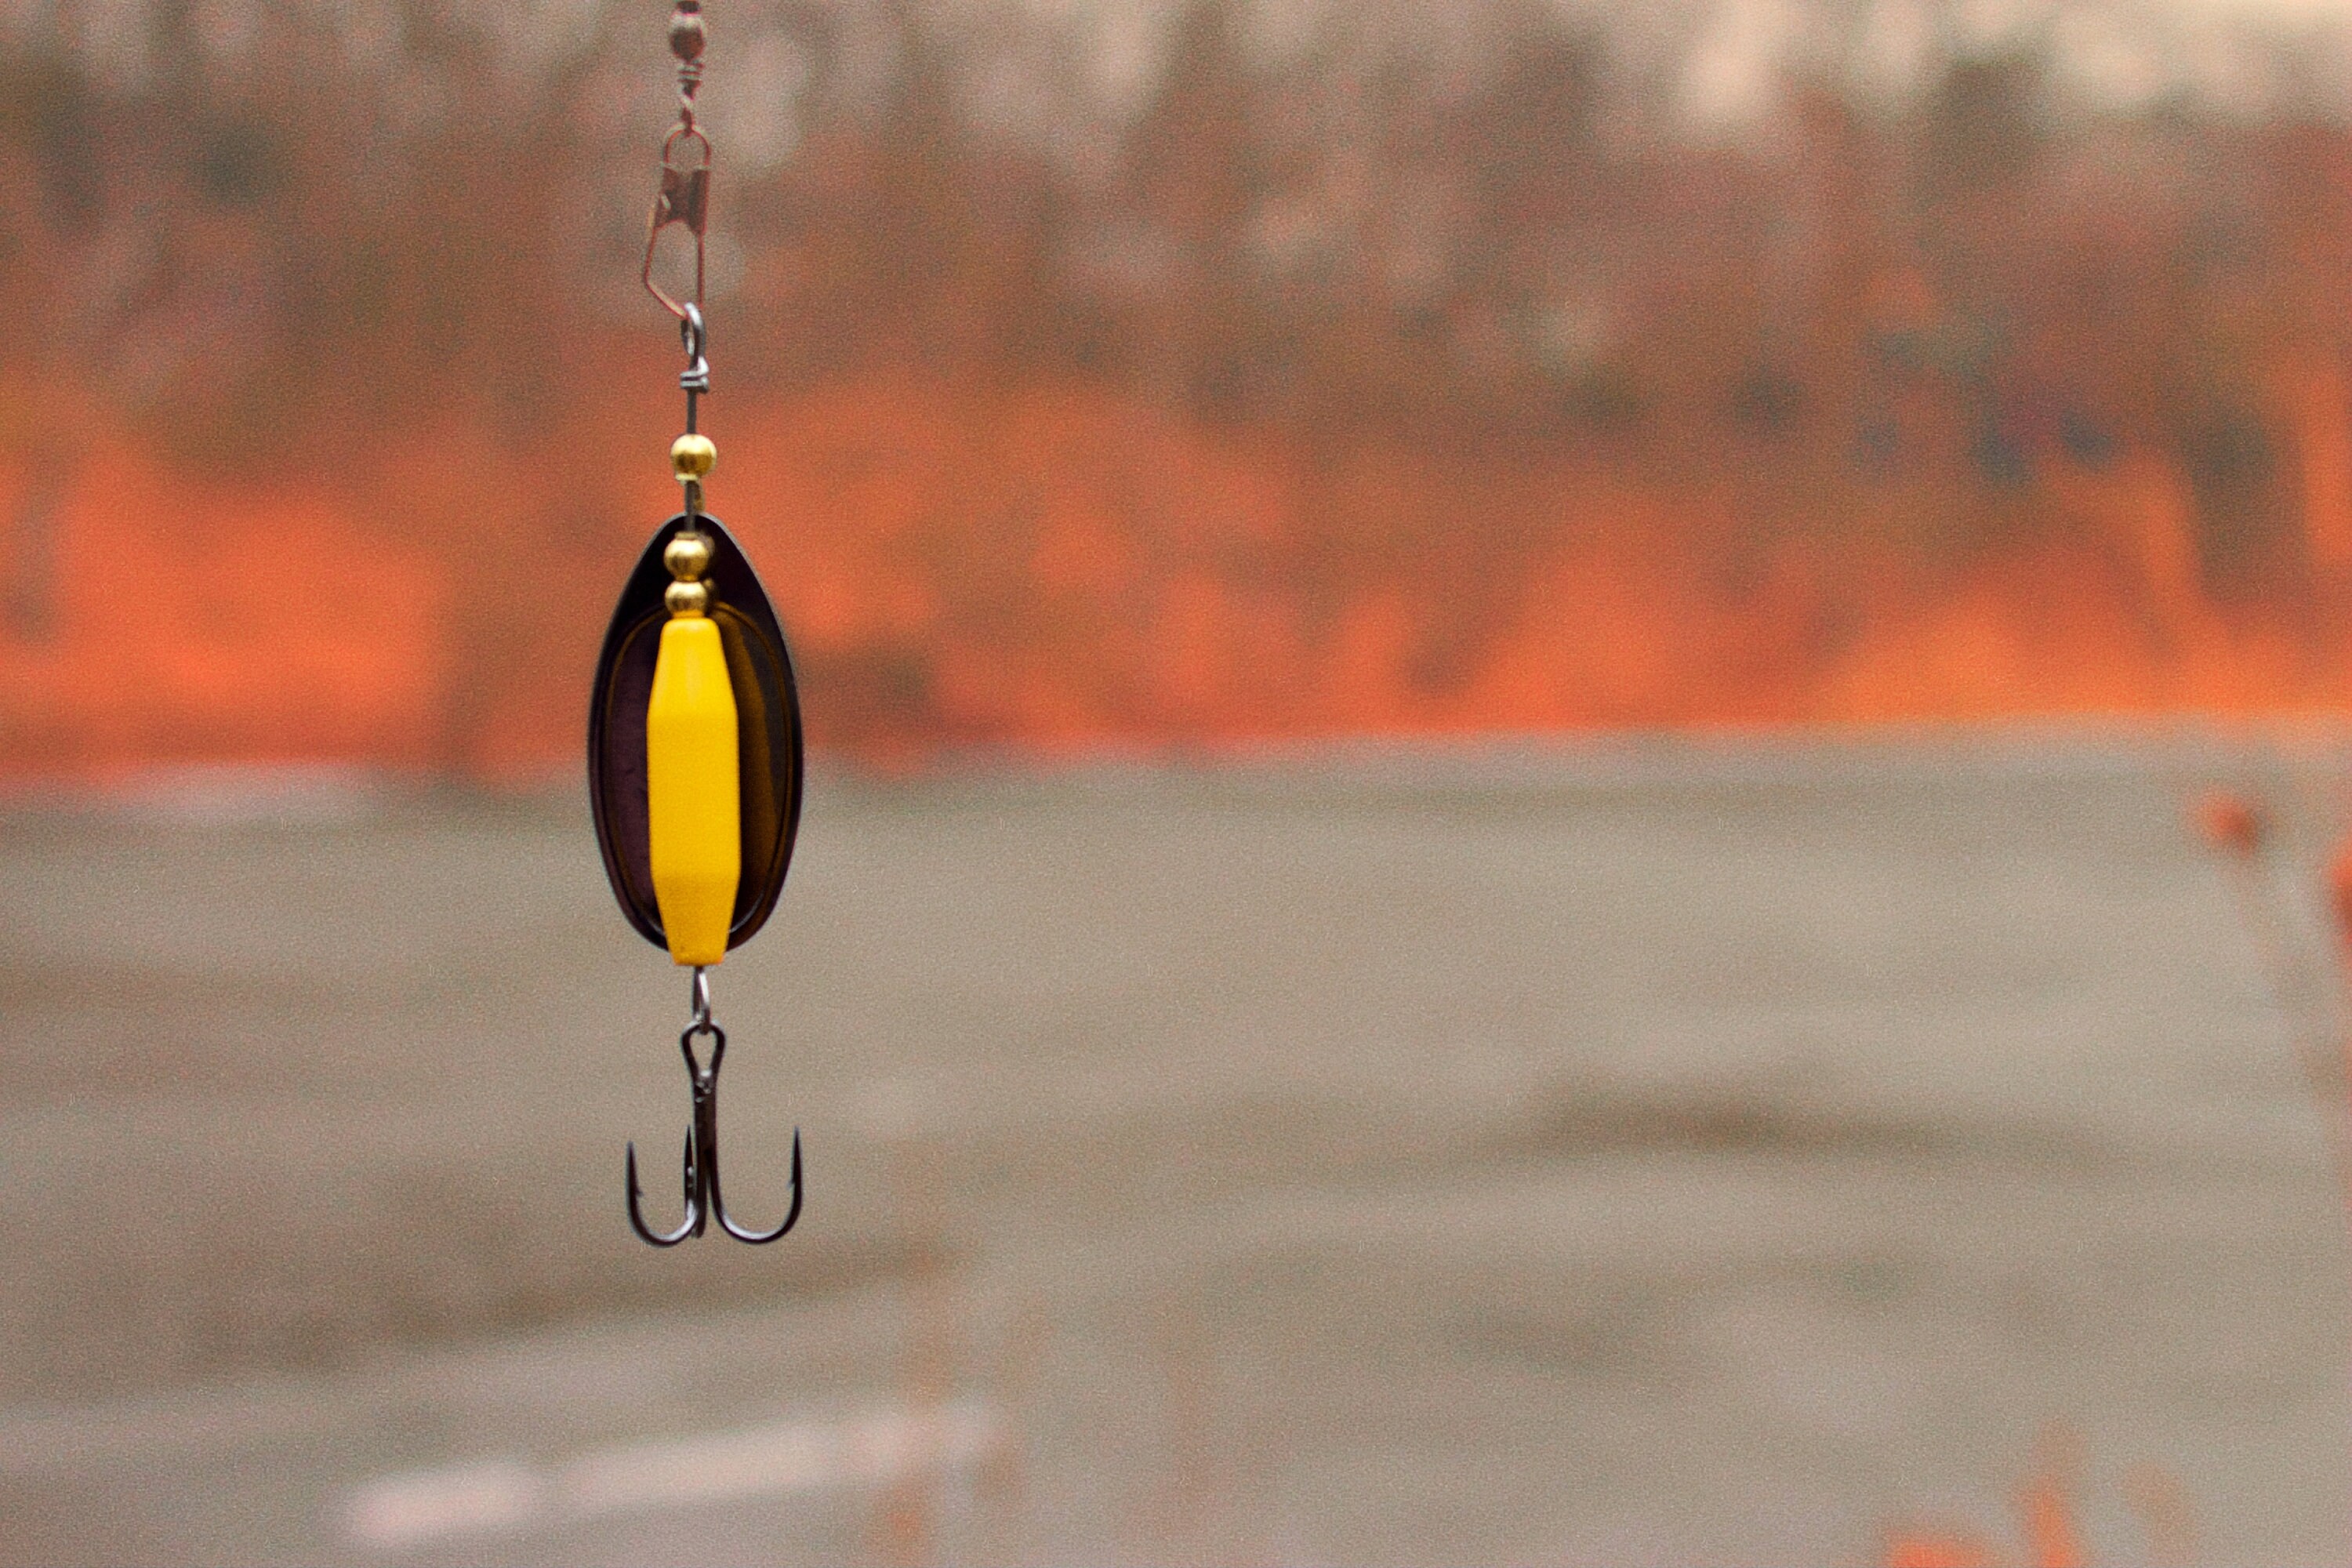 Handmade Spinner Fishing Lure Yellow W/ Black Blade Inline Spinner Made in Canada  Trout Salmon Bass Pike Perch Walleye Fishing Gift 